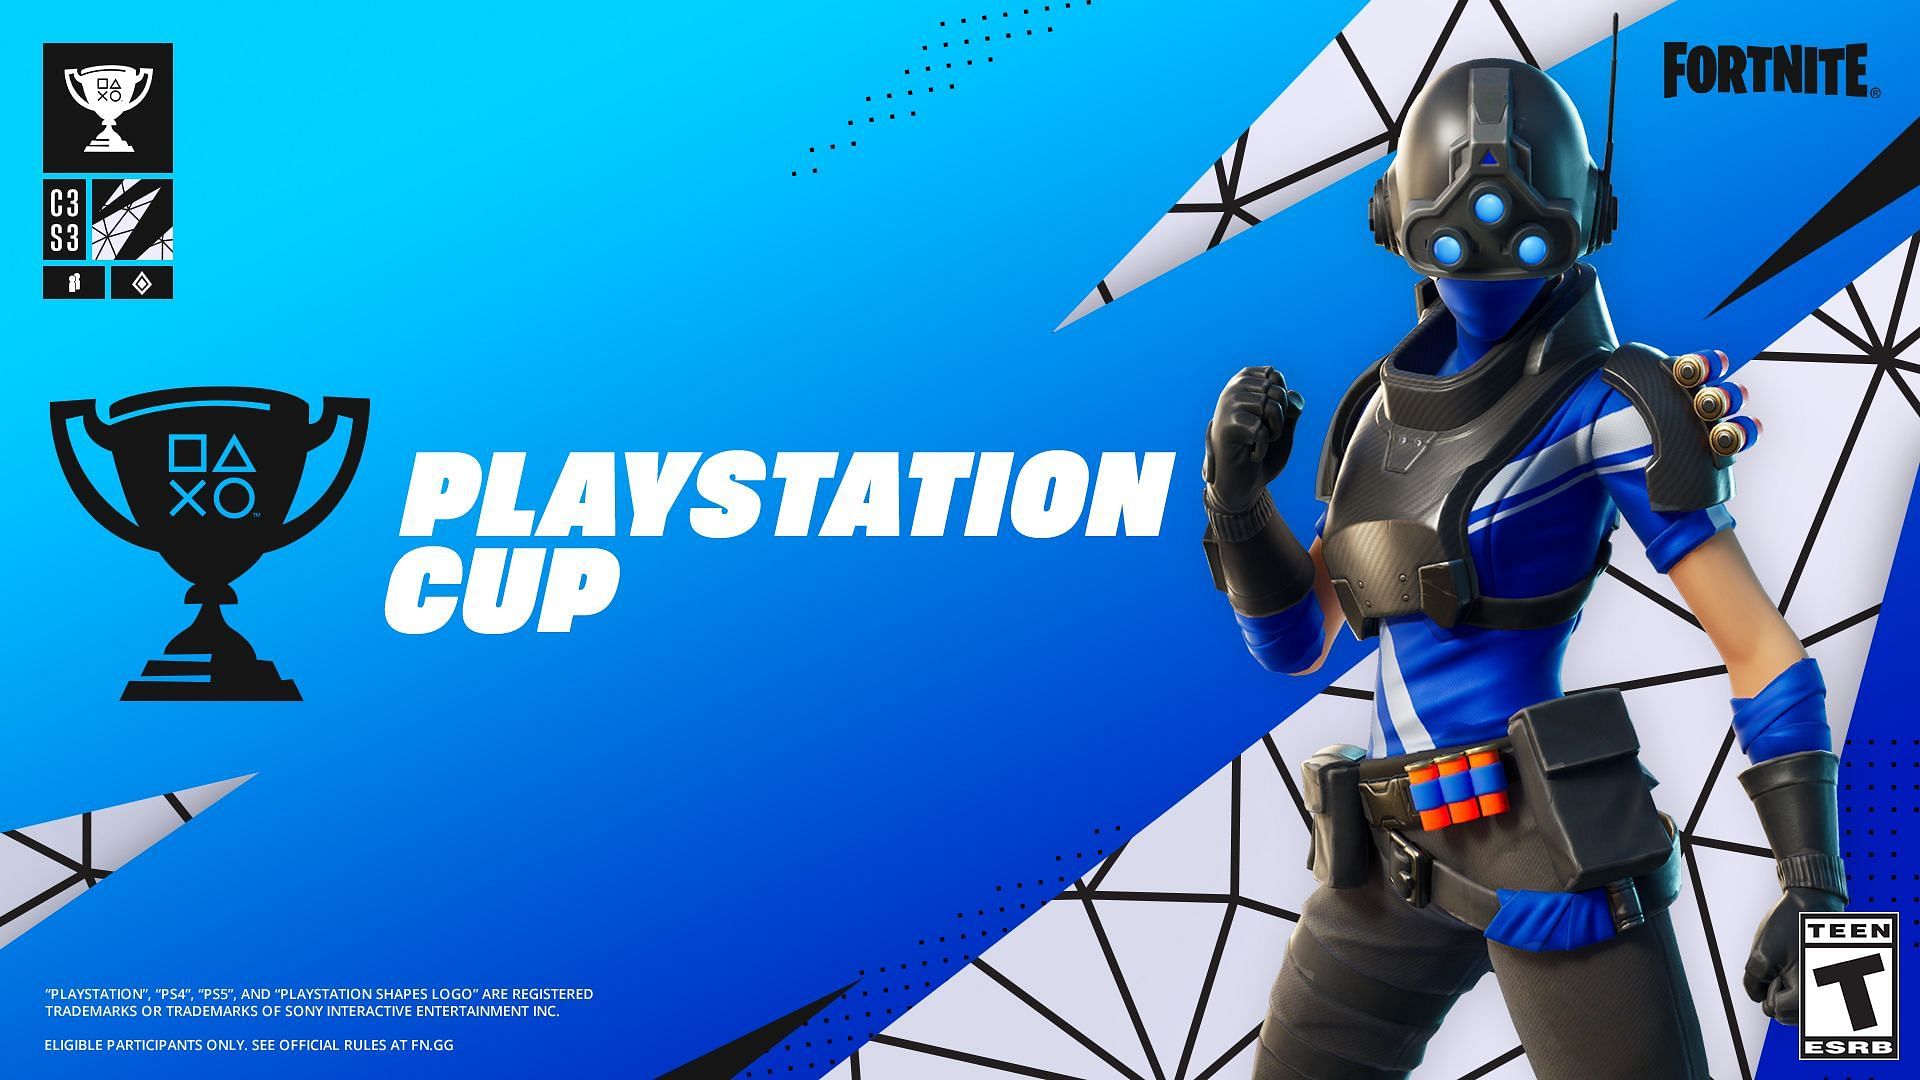 The Fortnite PlayStation Cup will go live on August 25, 2022 (Image via Twitter/PlayStation)